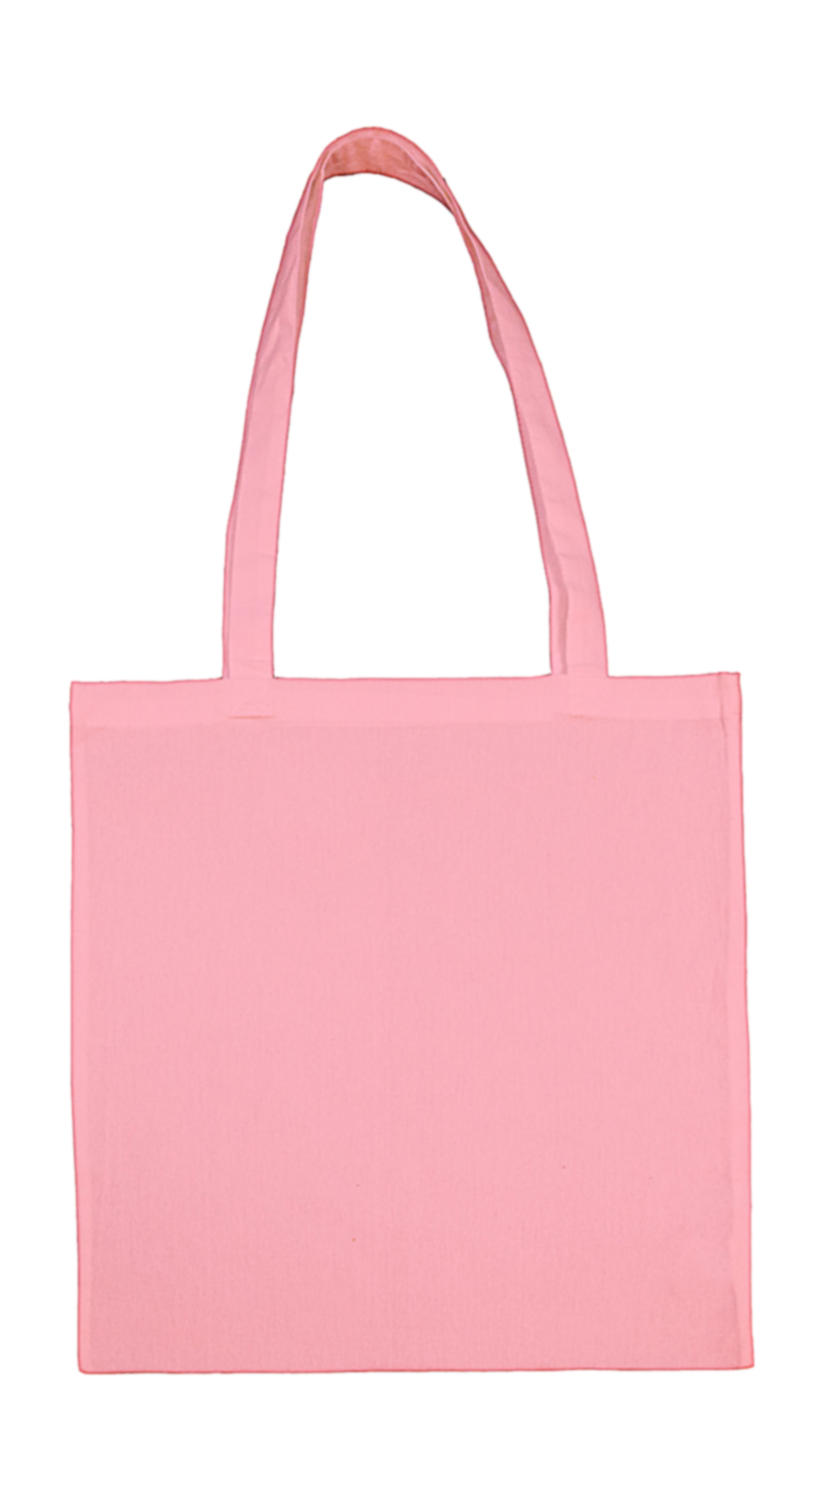  Cotton Bag LH in Farbe Rose